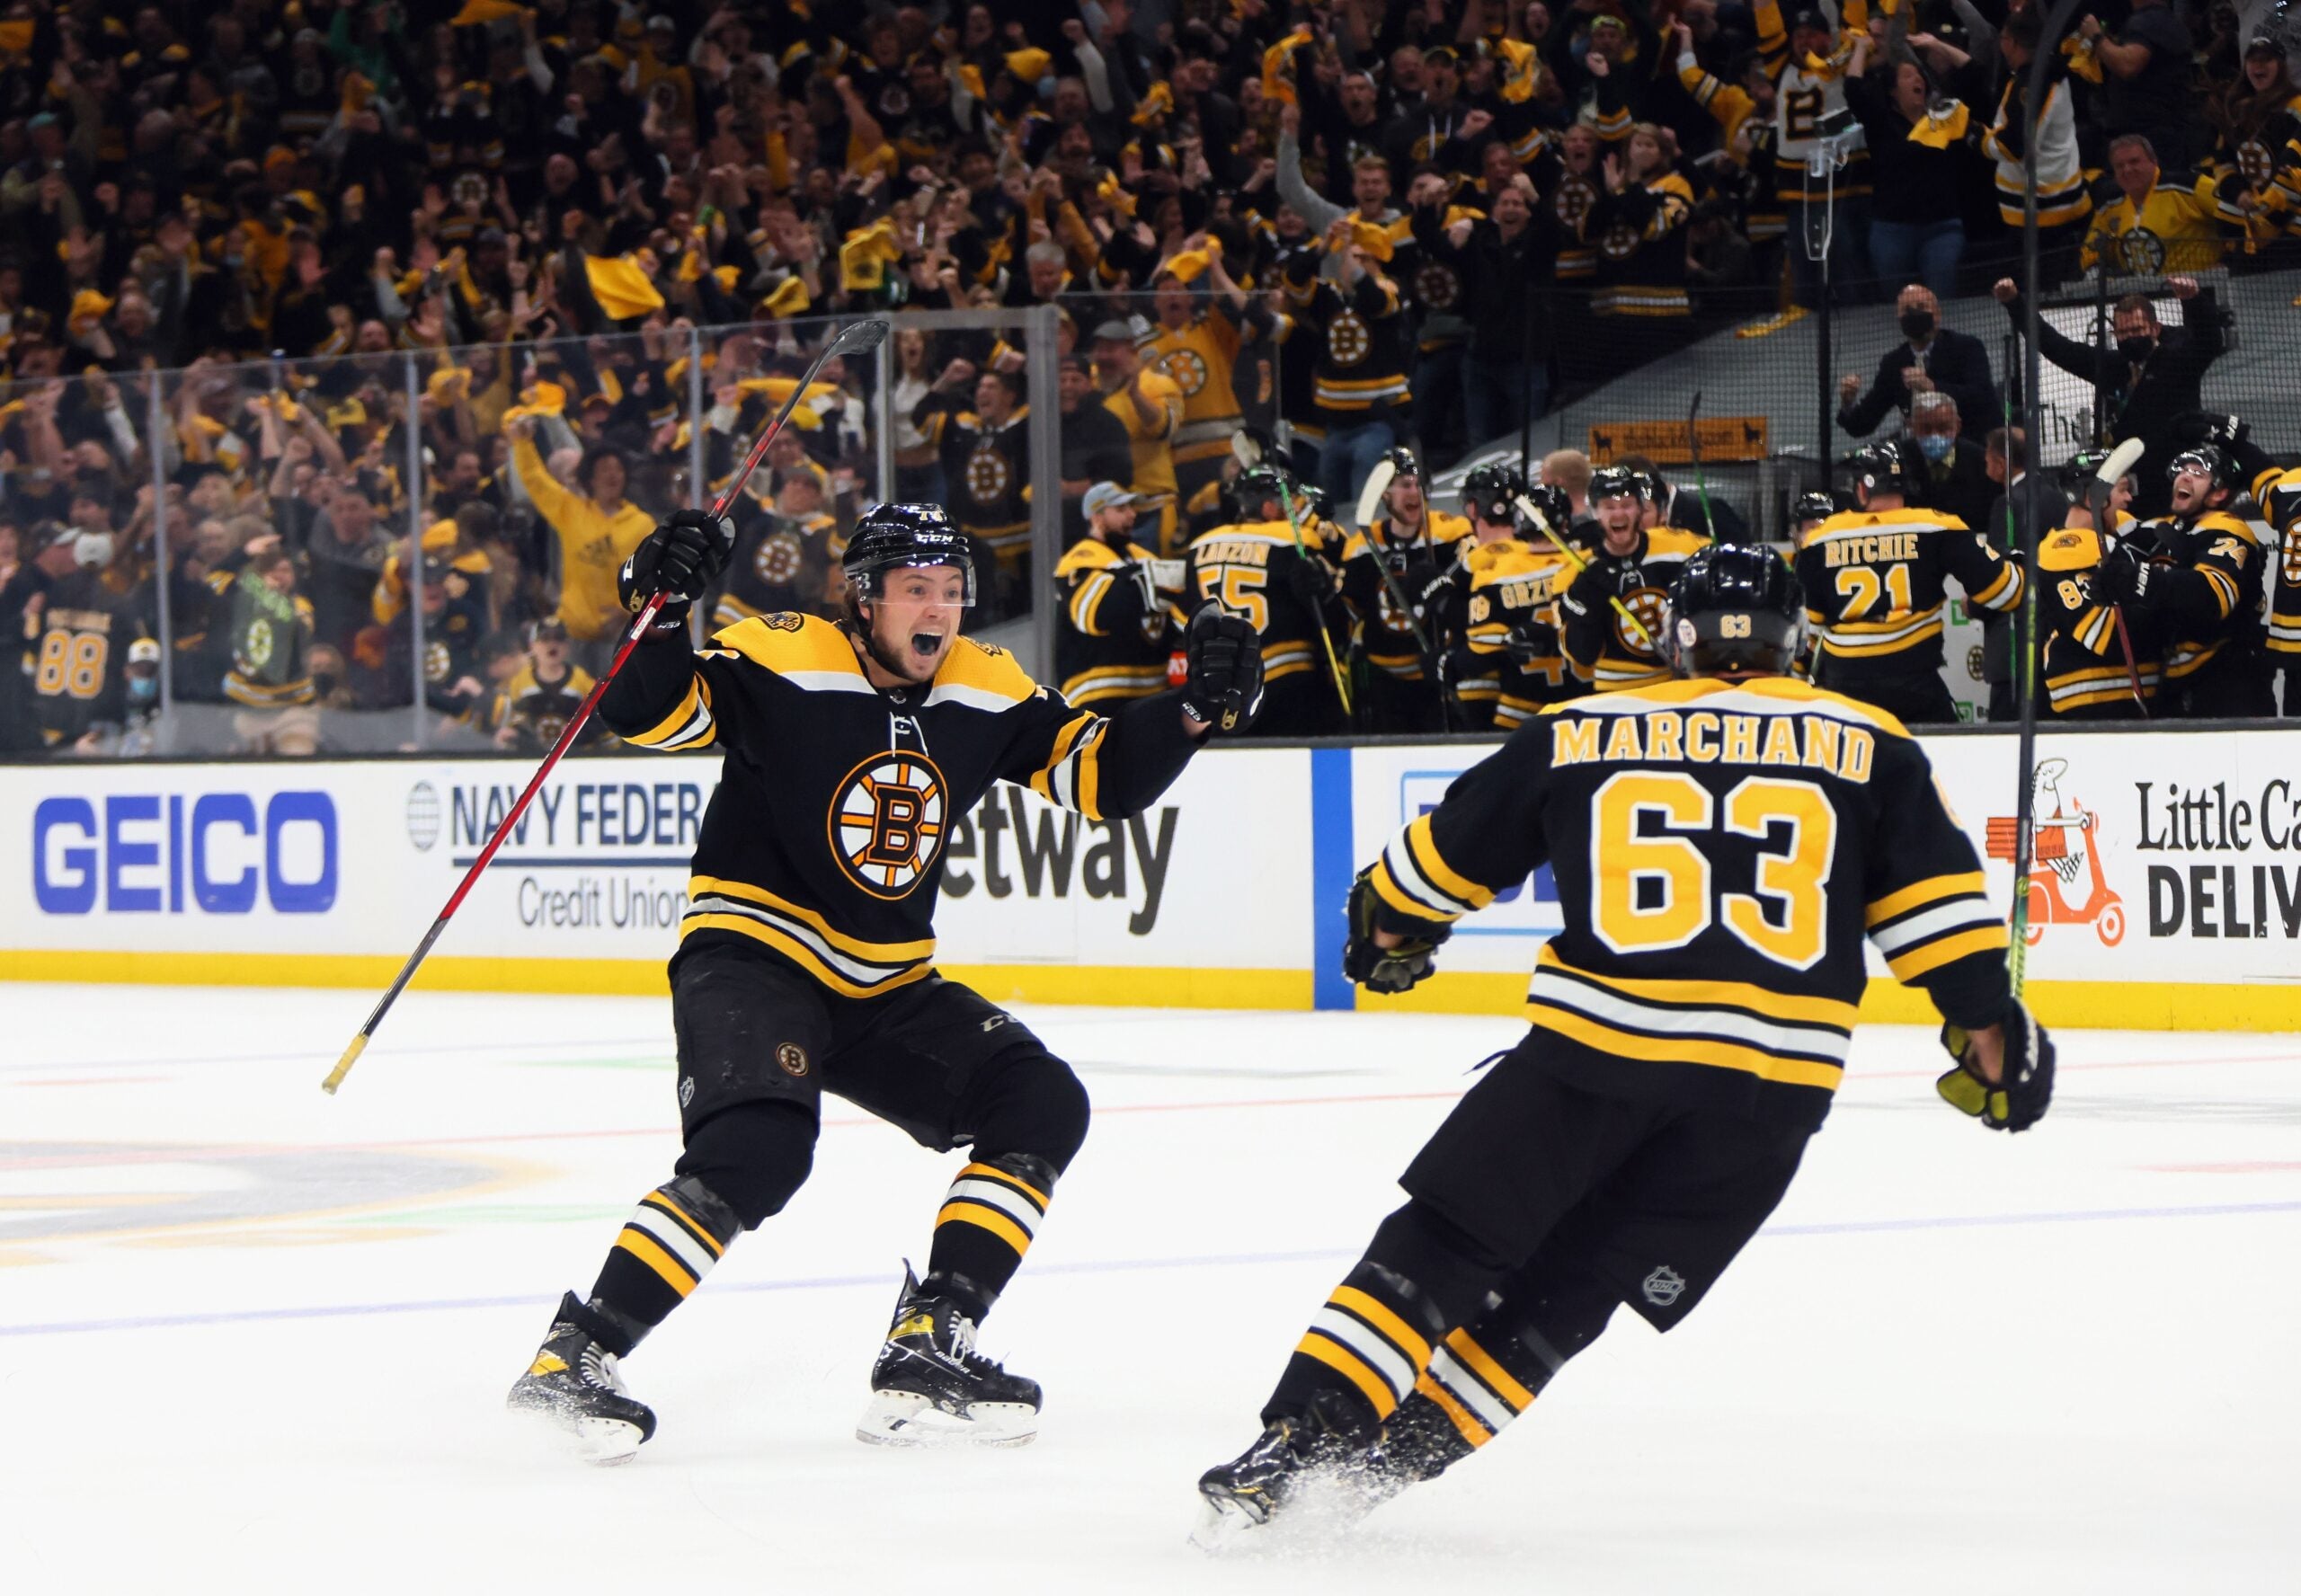 McAvoy's Late Goal Lifts Bruins to 4-3 Win Over Capitals - Bloomberg